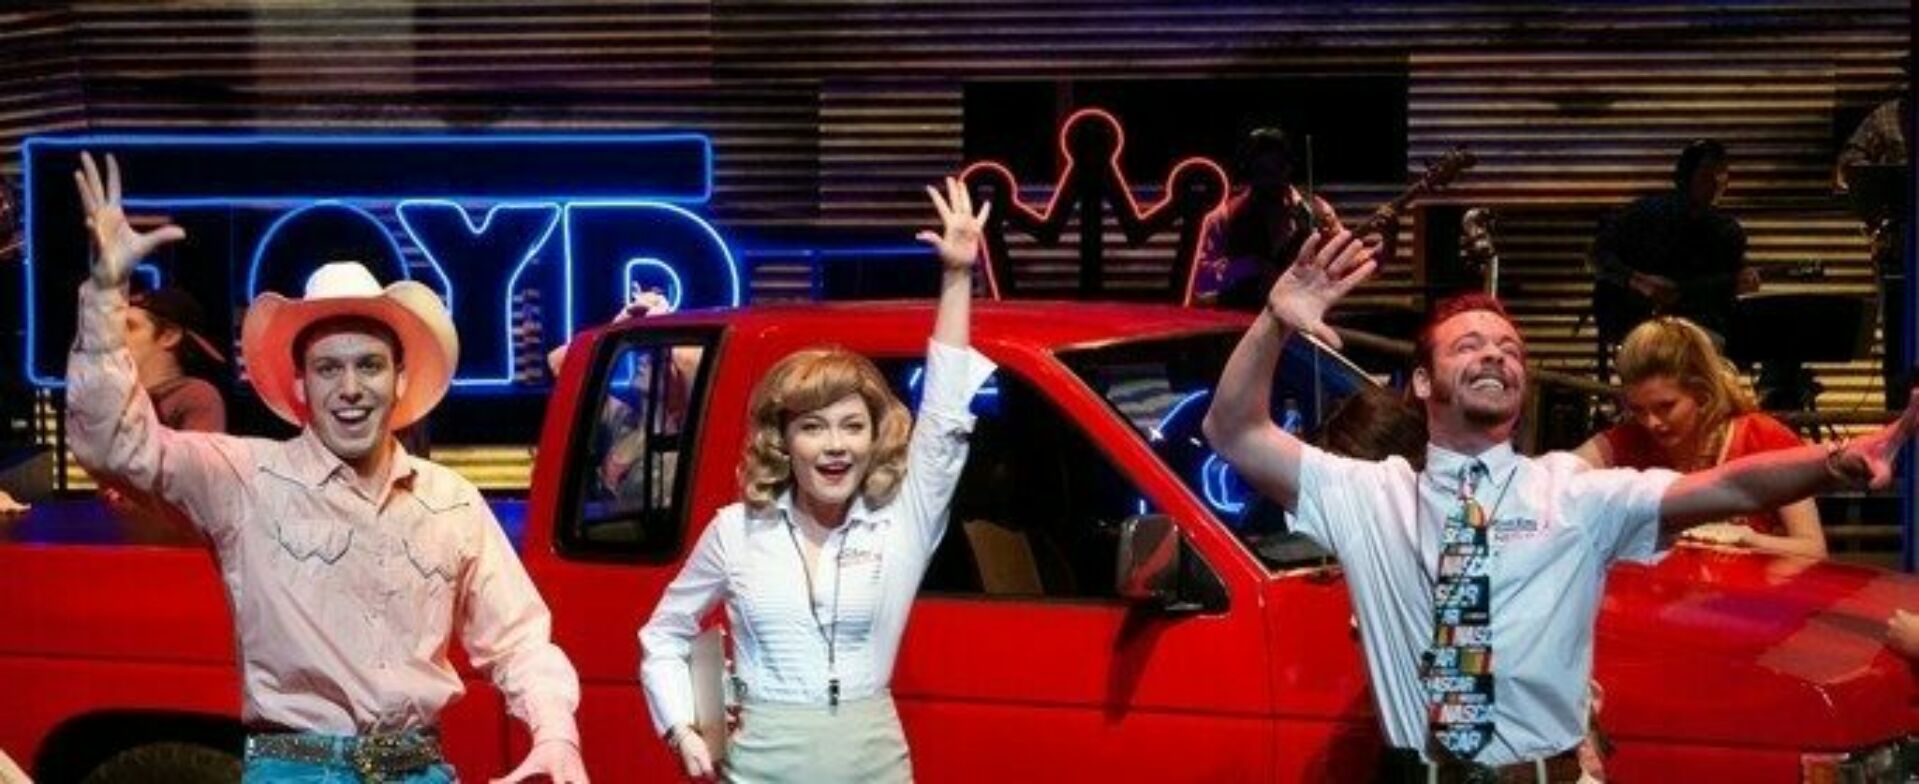 Theatre students dancing and singing in front of a bright red truck with neon lights in the background.